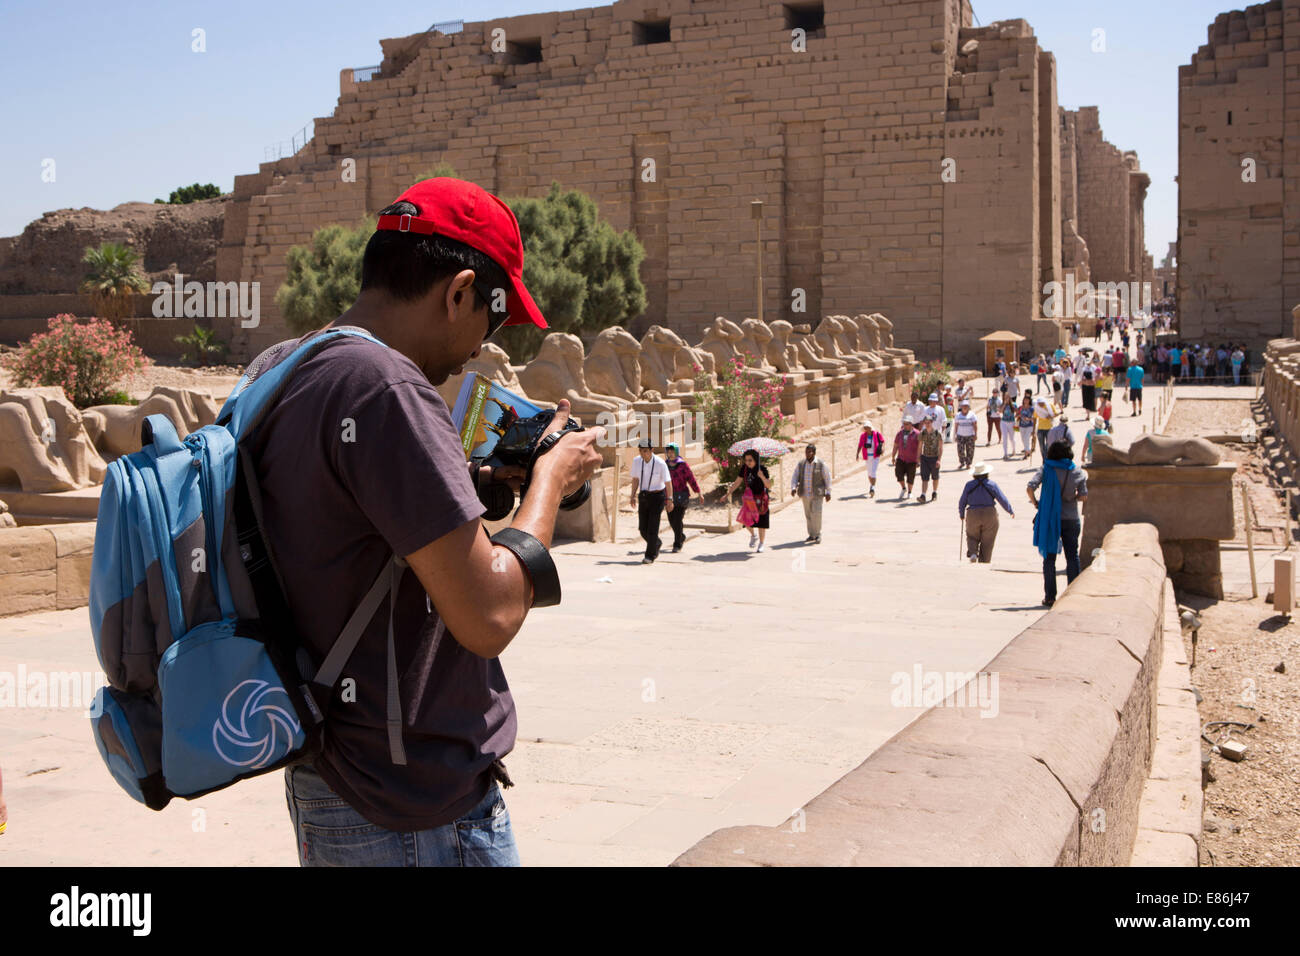 Egypt, Luxor, Karnak Temple, tourist photographing Avenue of Rams at temple entrance Stock Photo